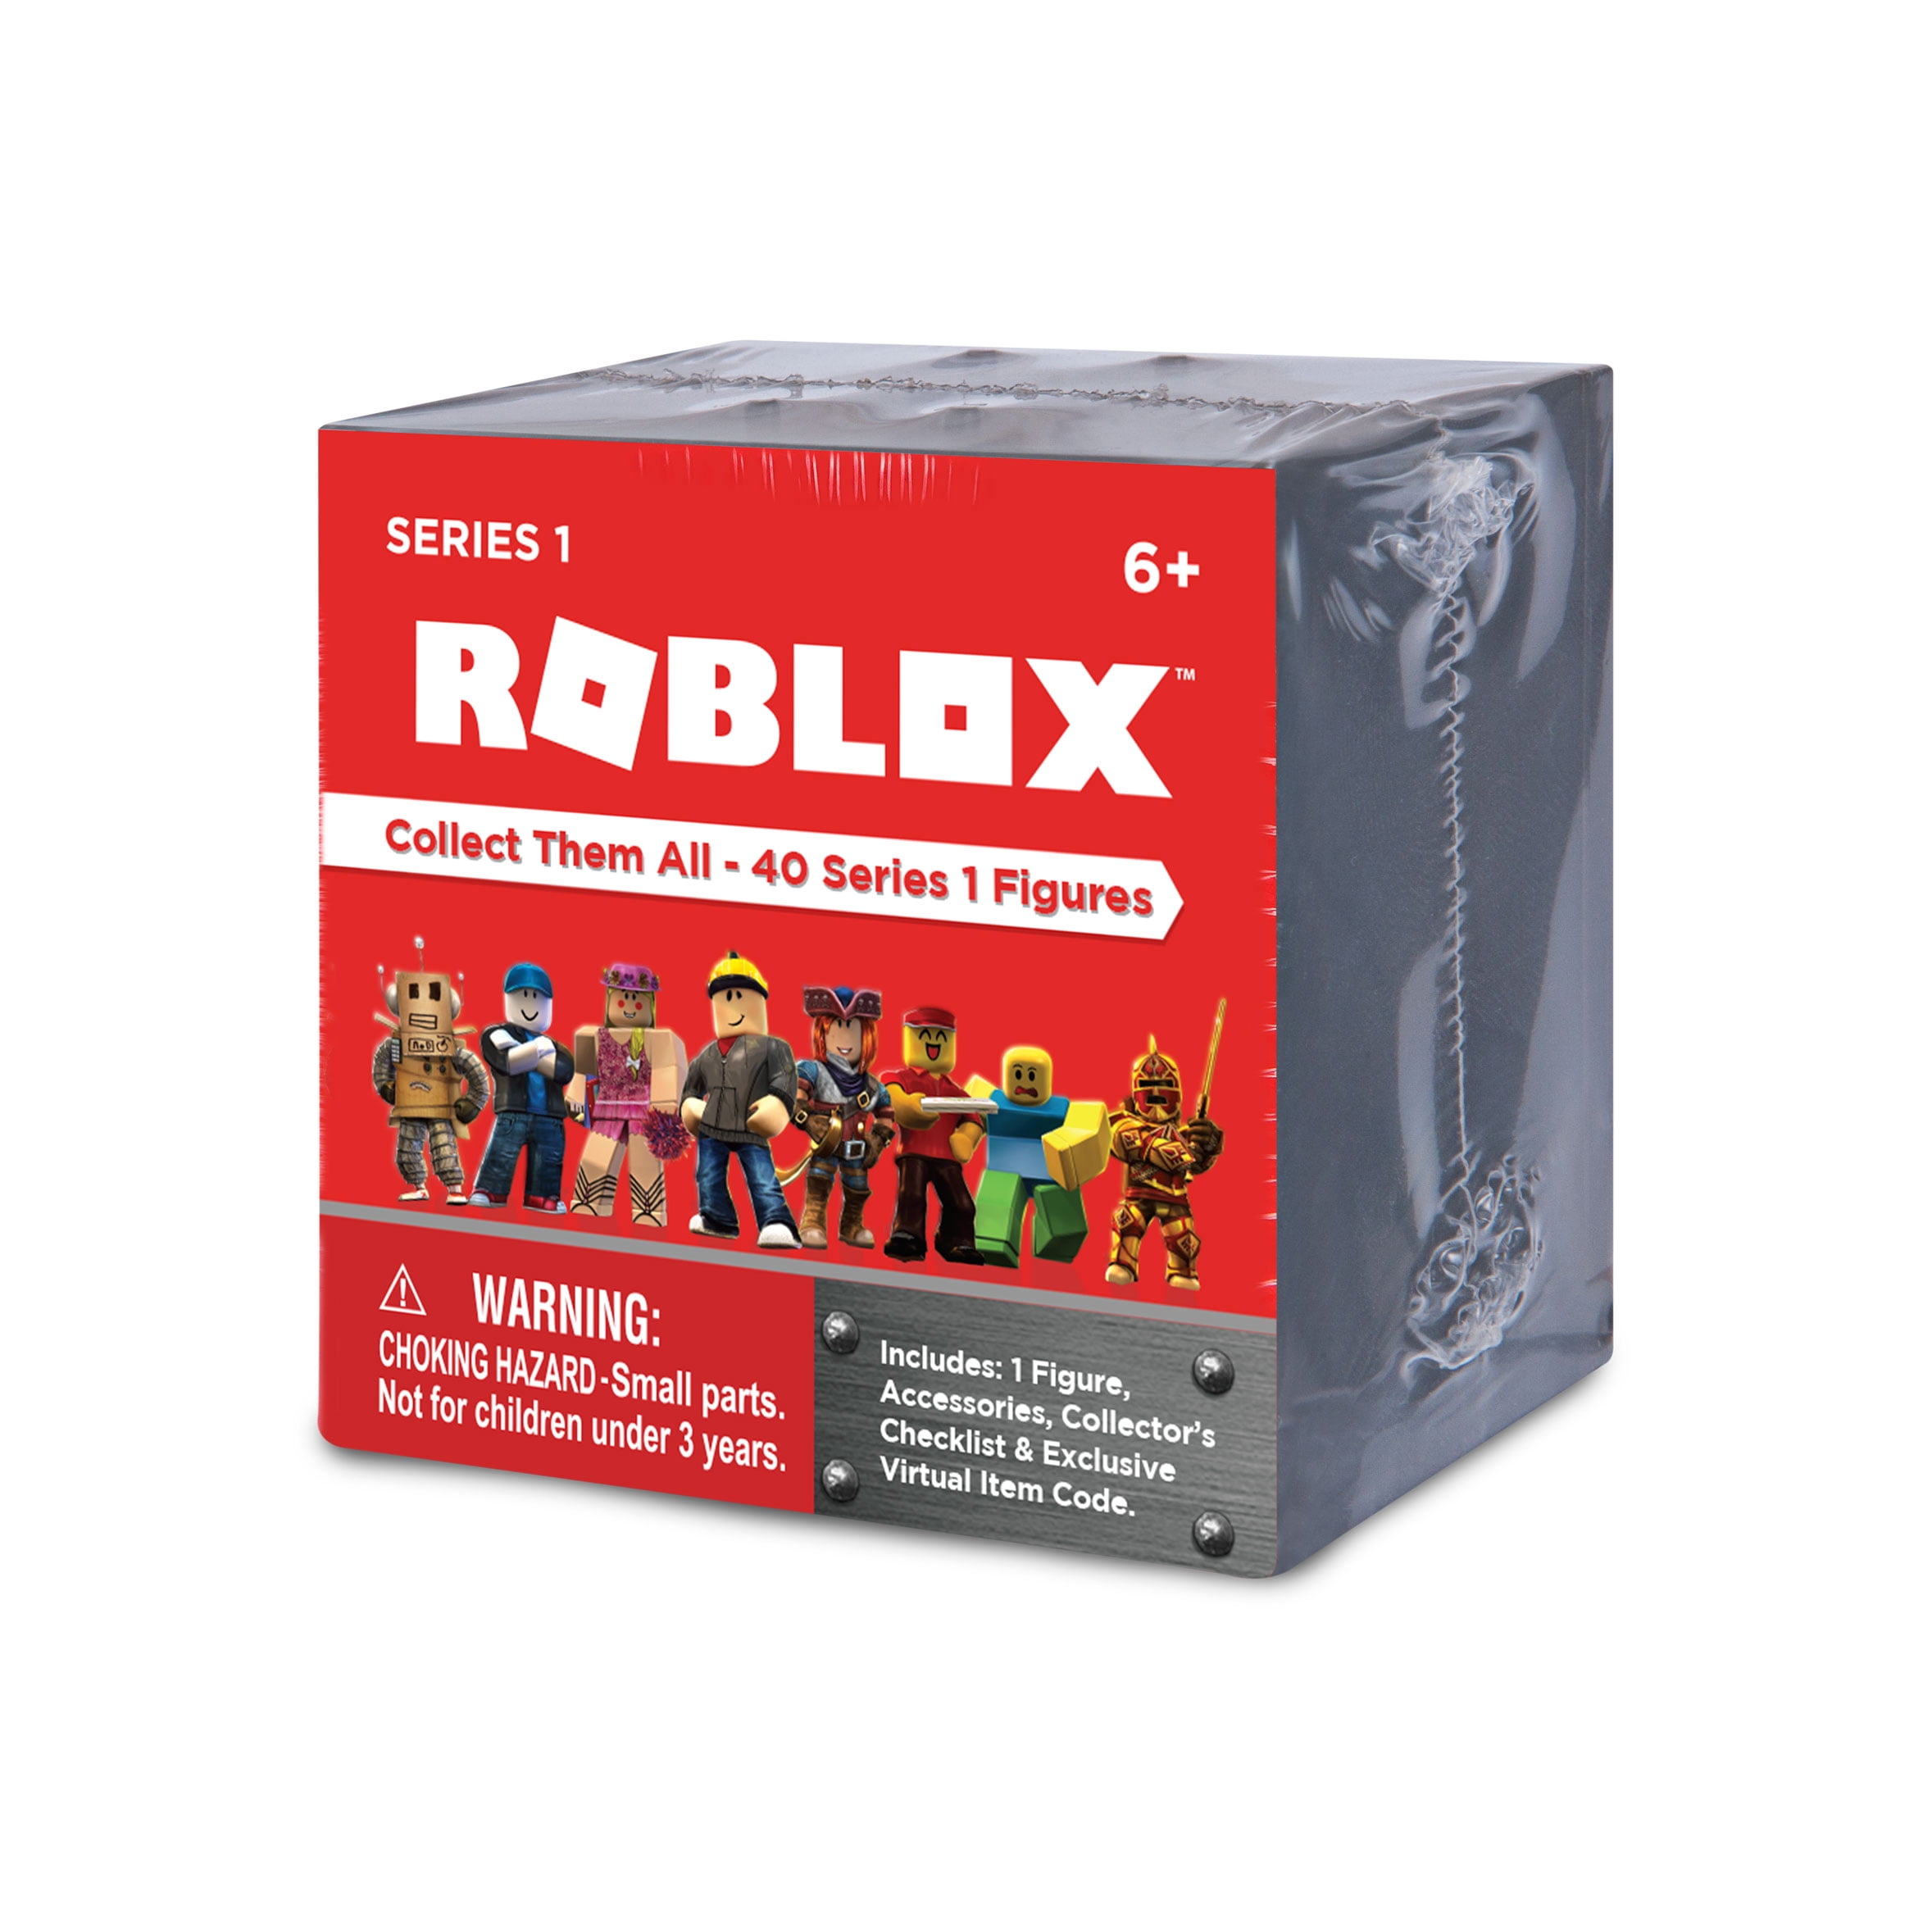 Roblox Mystery Figure Series 1 1 Blind Box Containing 1 Mystery Figure Walmartcom - roblox code for ima t ake my houres